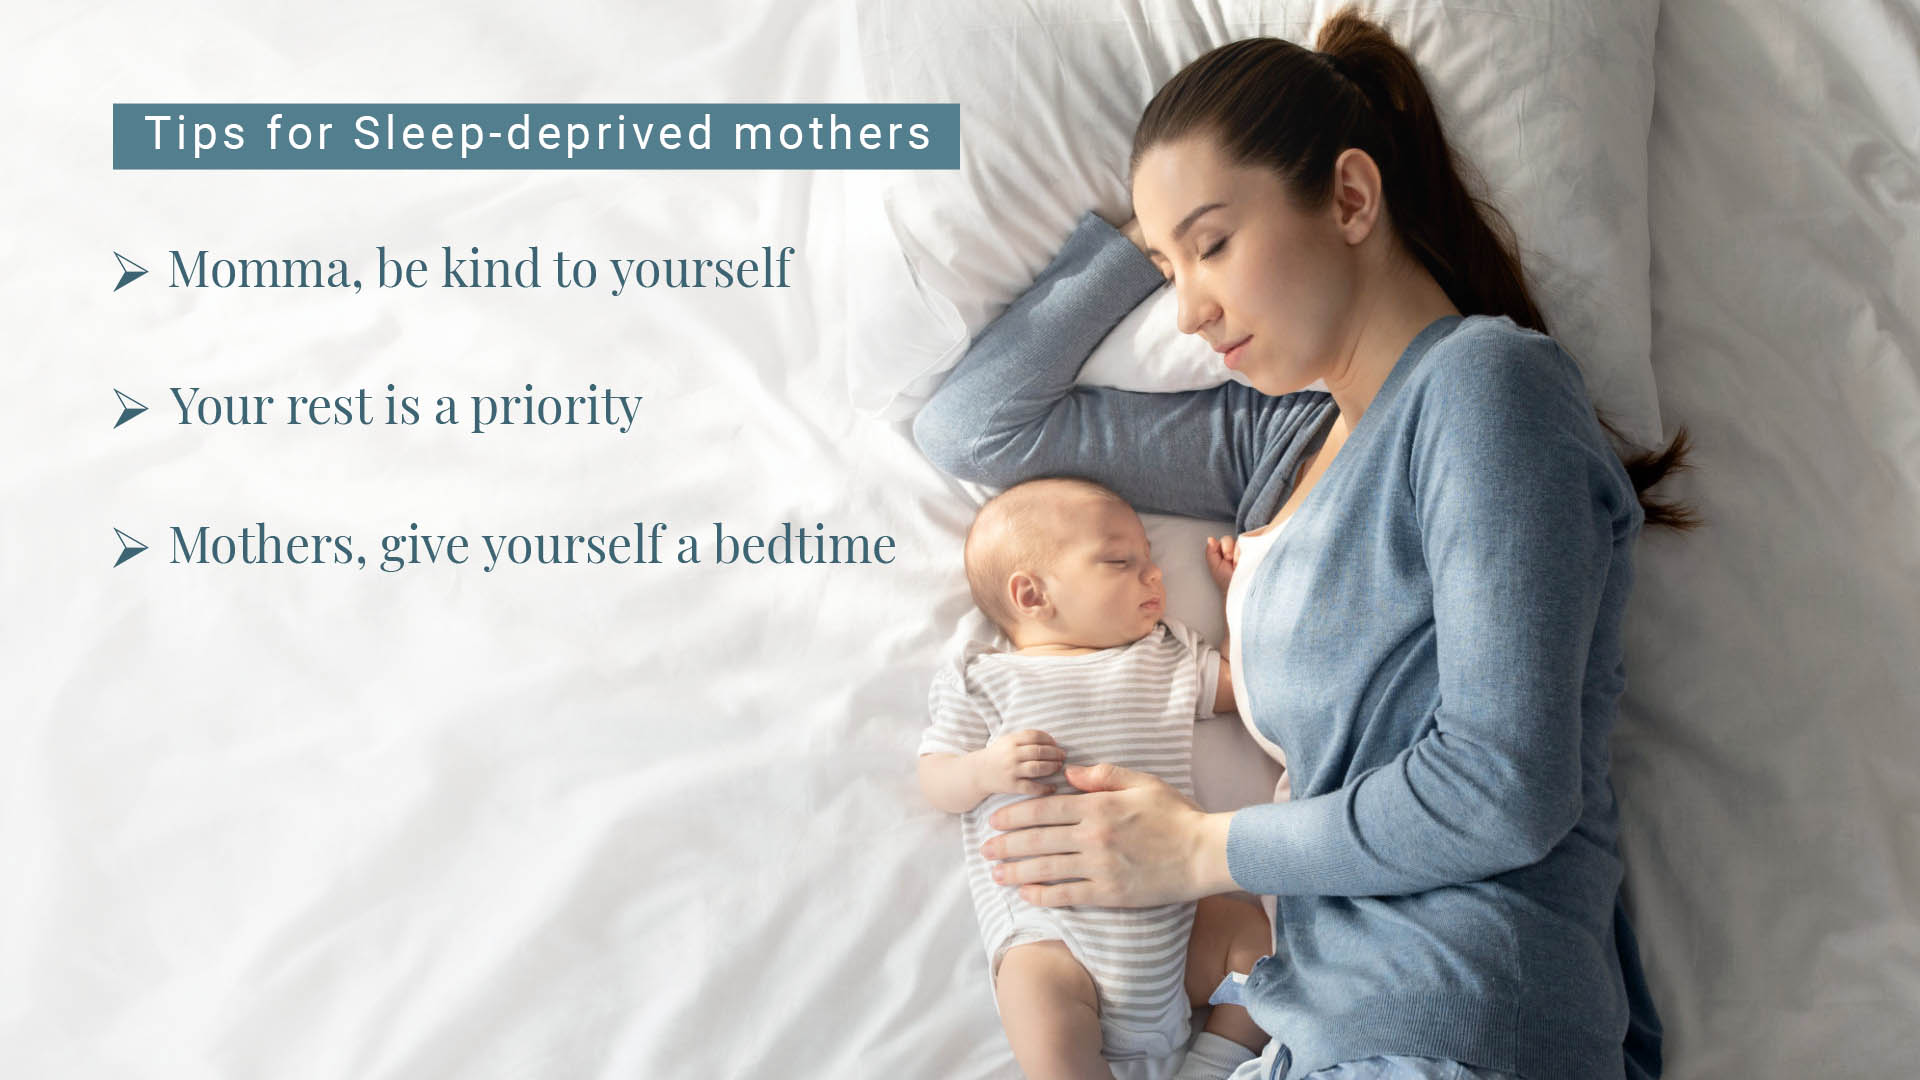 Tips for Sleep-deprived mothers